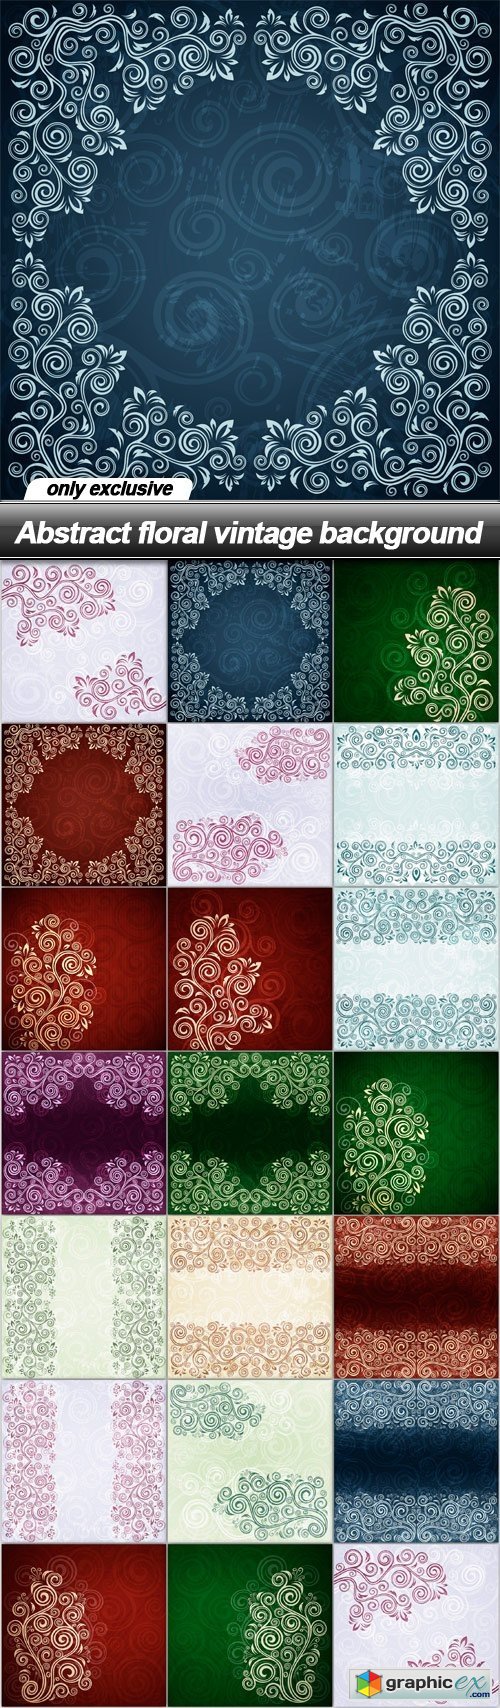 Abstract floral vintage background - 20 EPS